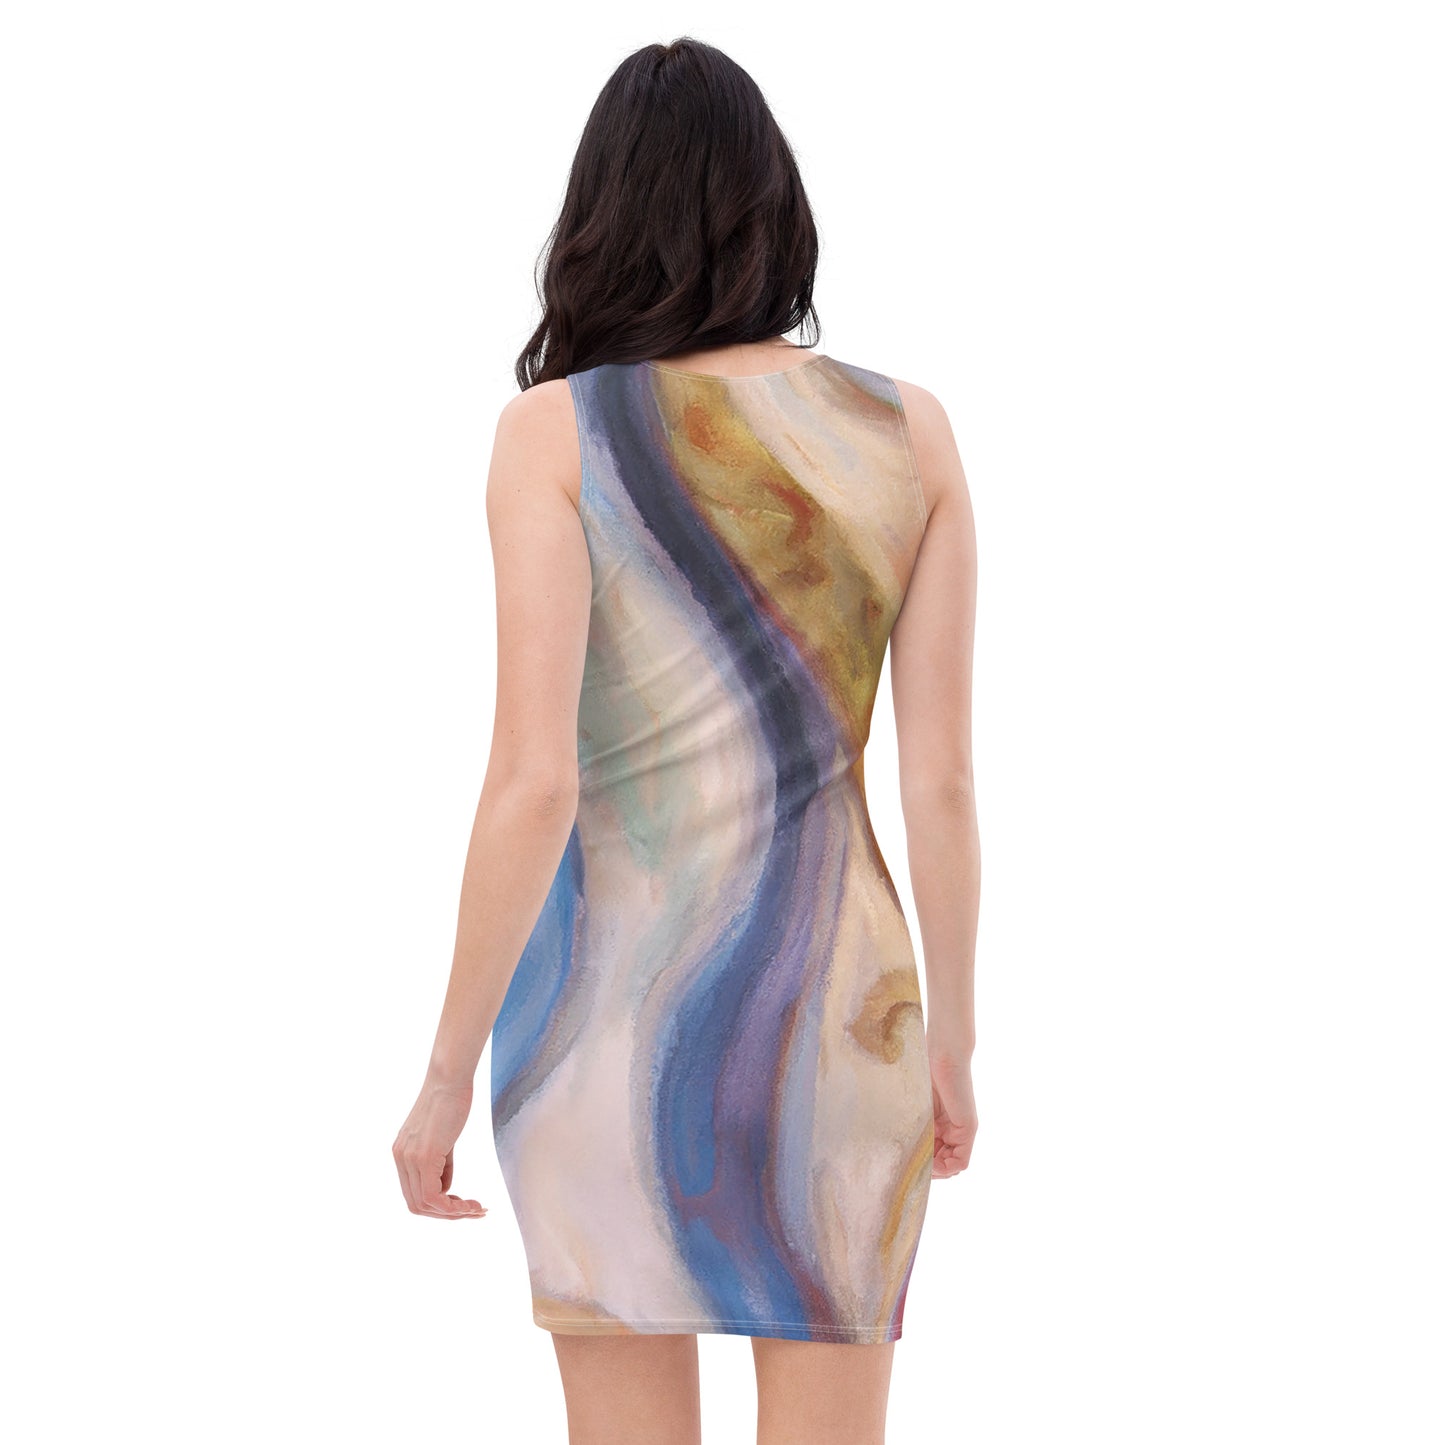 The Dance, Abstract, Tank Dress, Original Art, Womens, Lightweight, Wrinkle Free, Wash and Wear Fabric, Modern Casual Style and Fashion